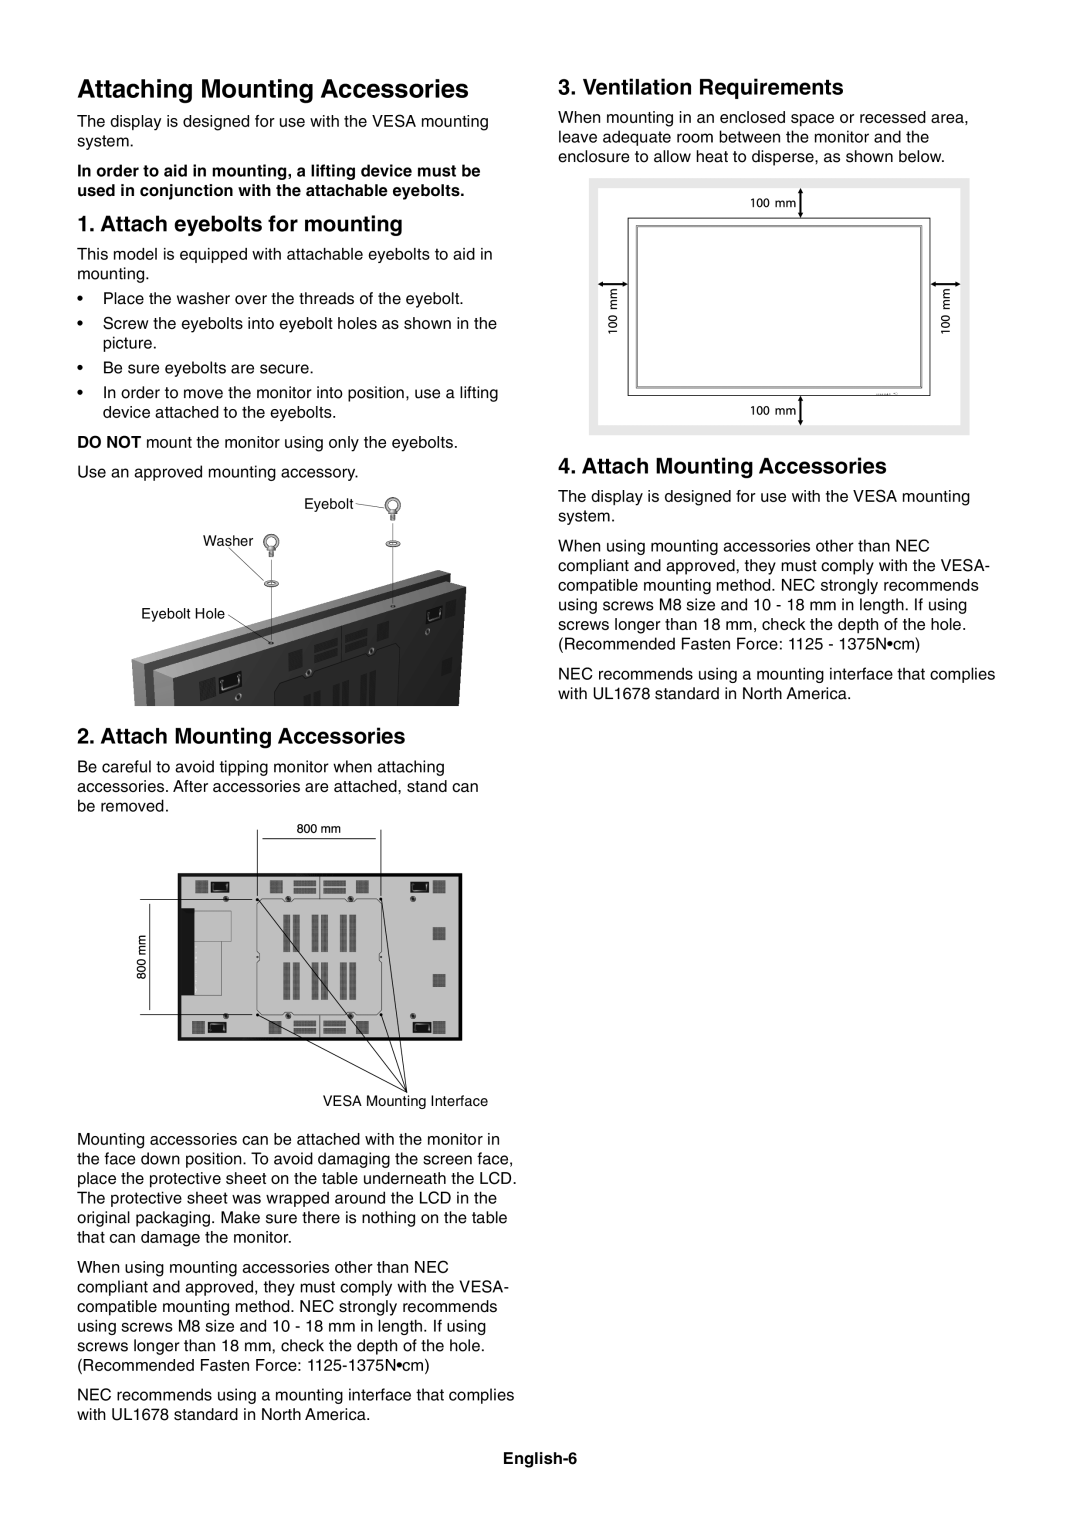 NEC LCD8205-P user manual Attaching Mounting Accessories, Attach eyebolts for mounting, Attach Mounting Accessories 